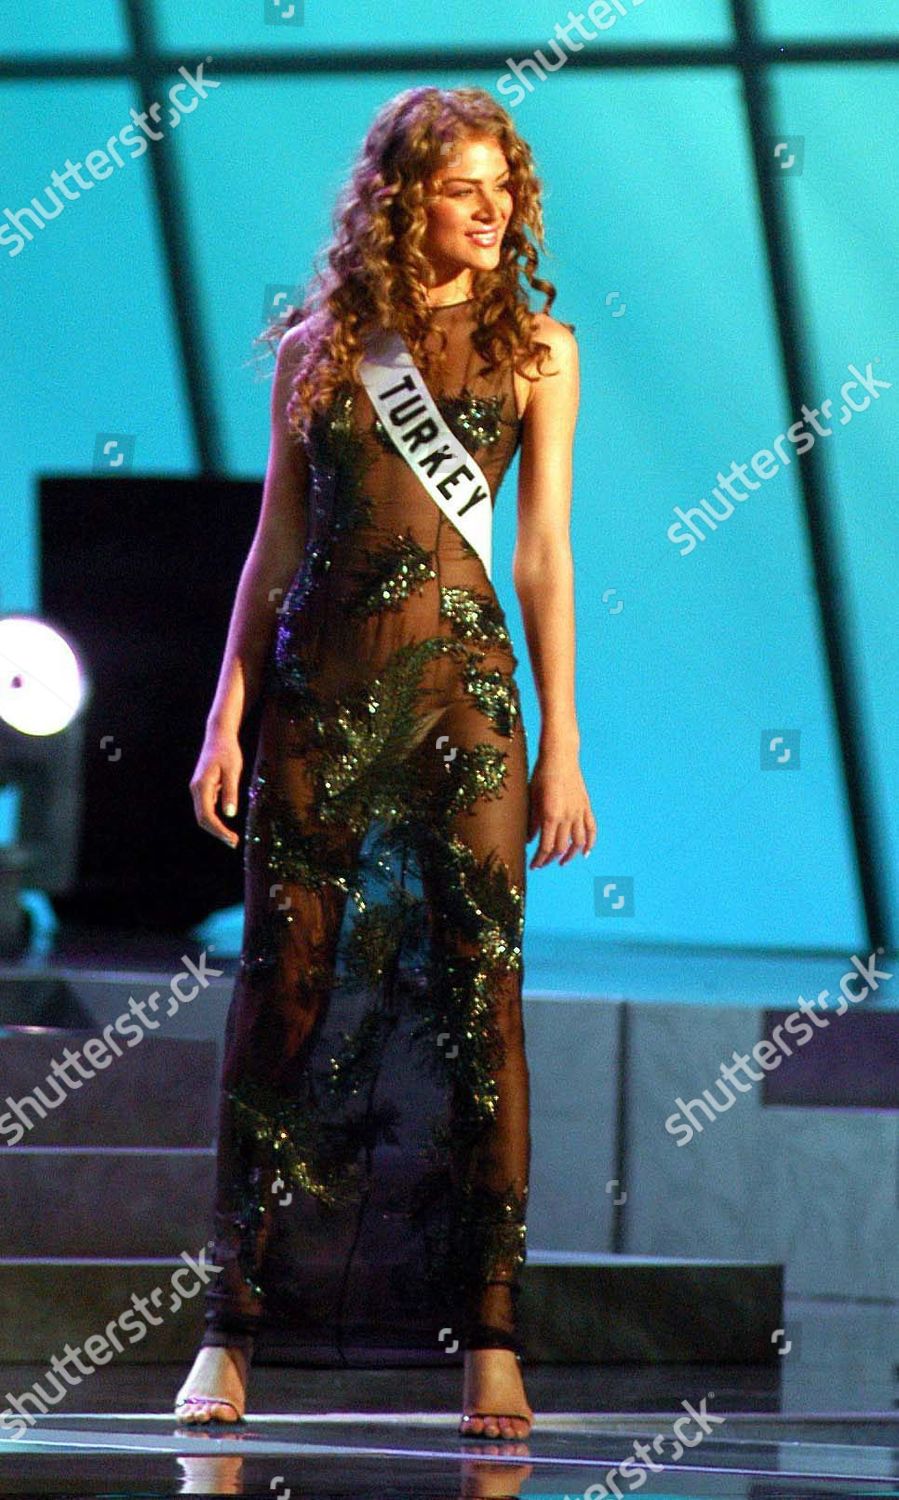 miss universe 2003 evening gown